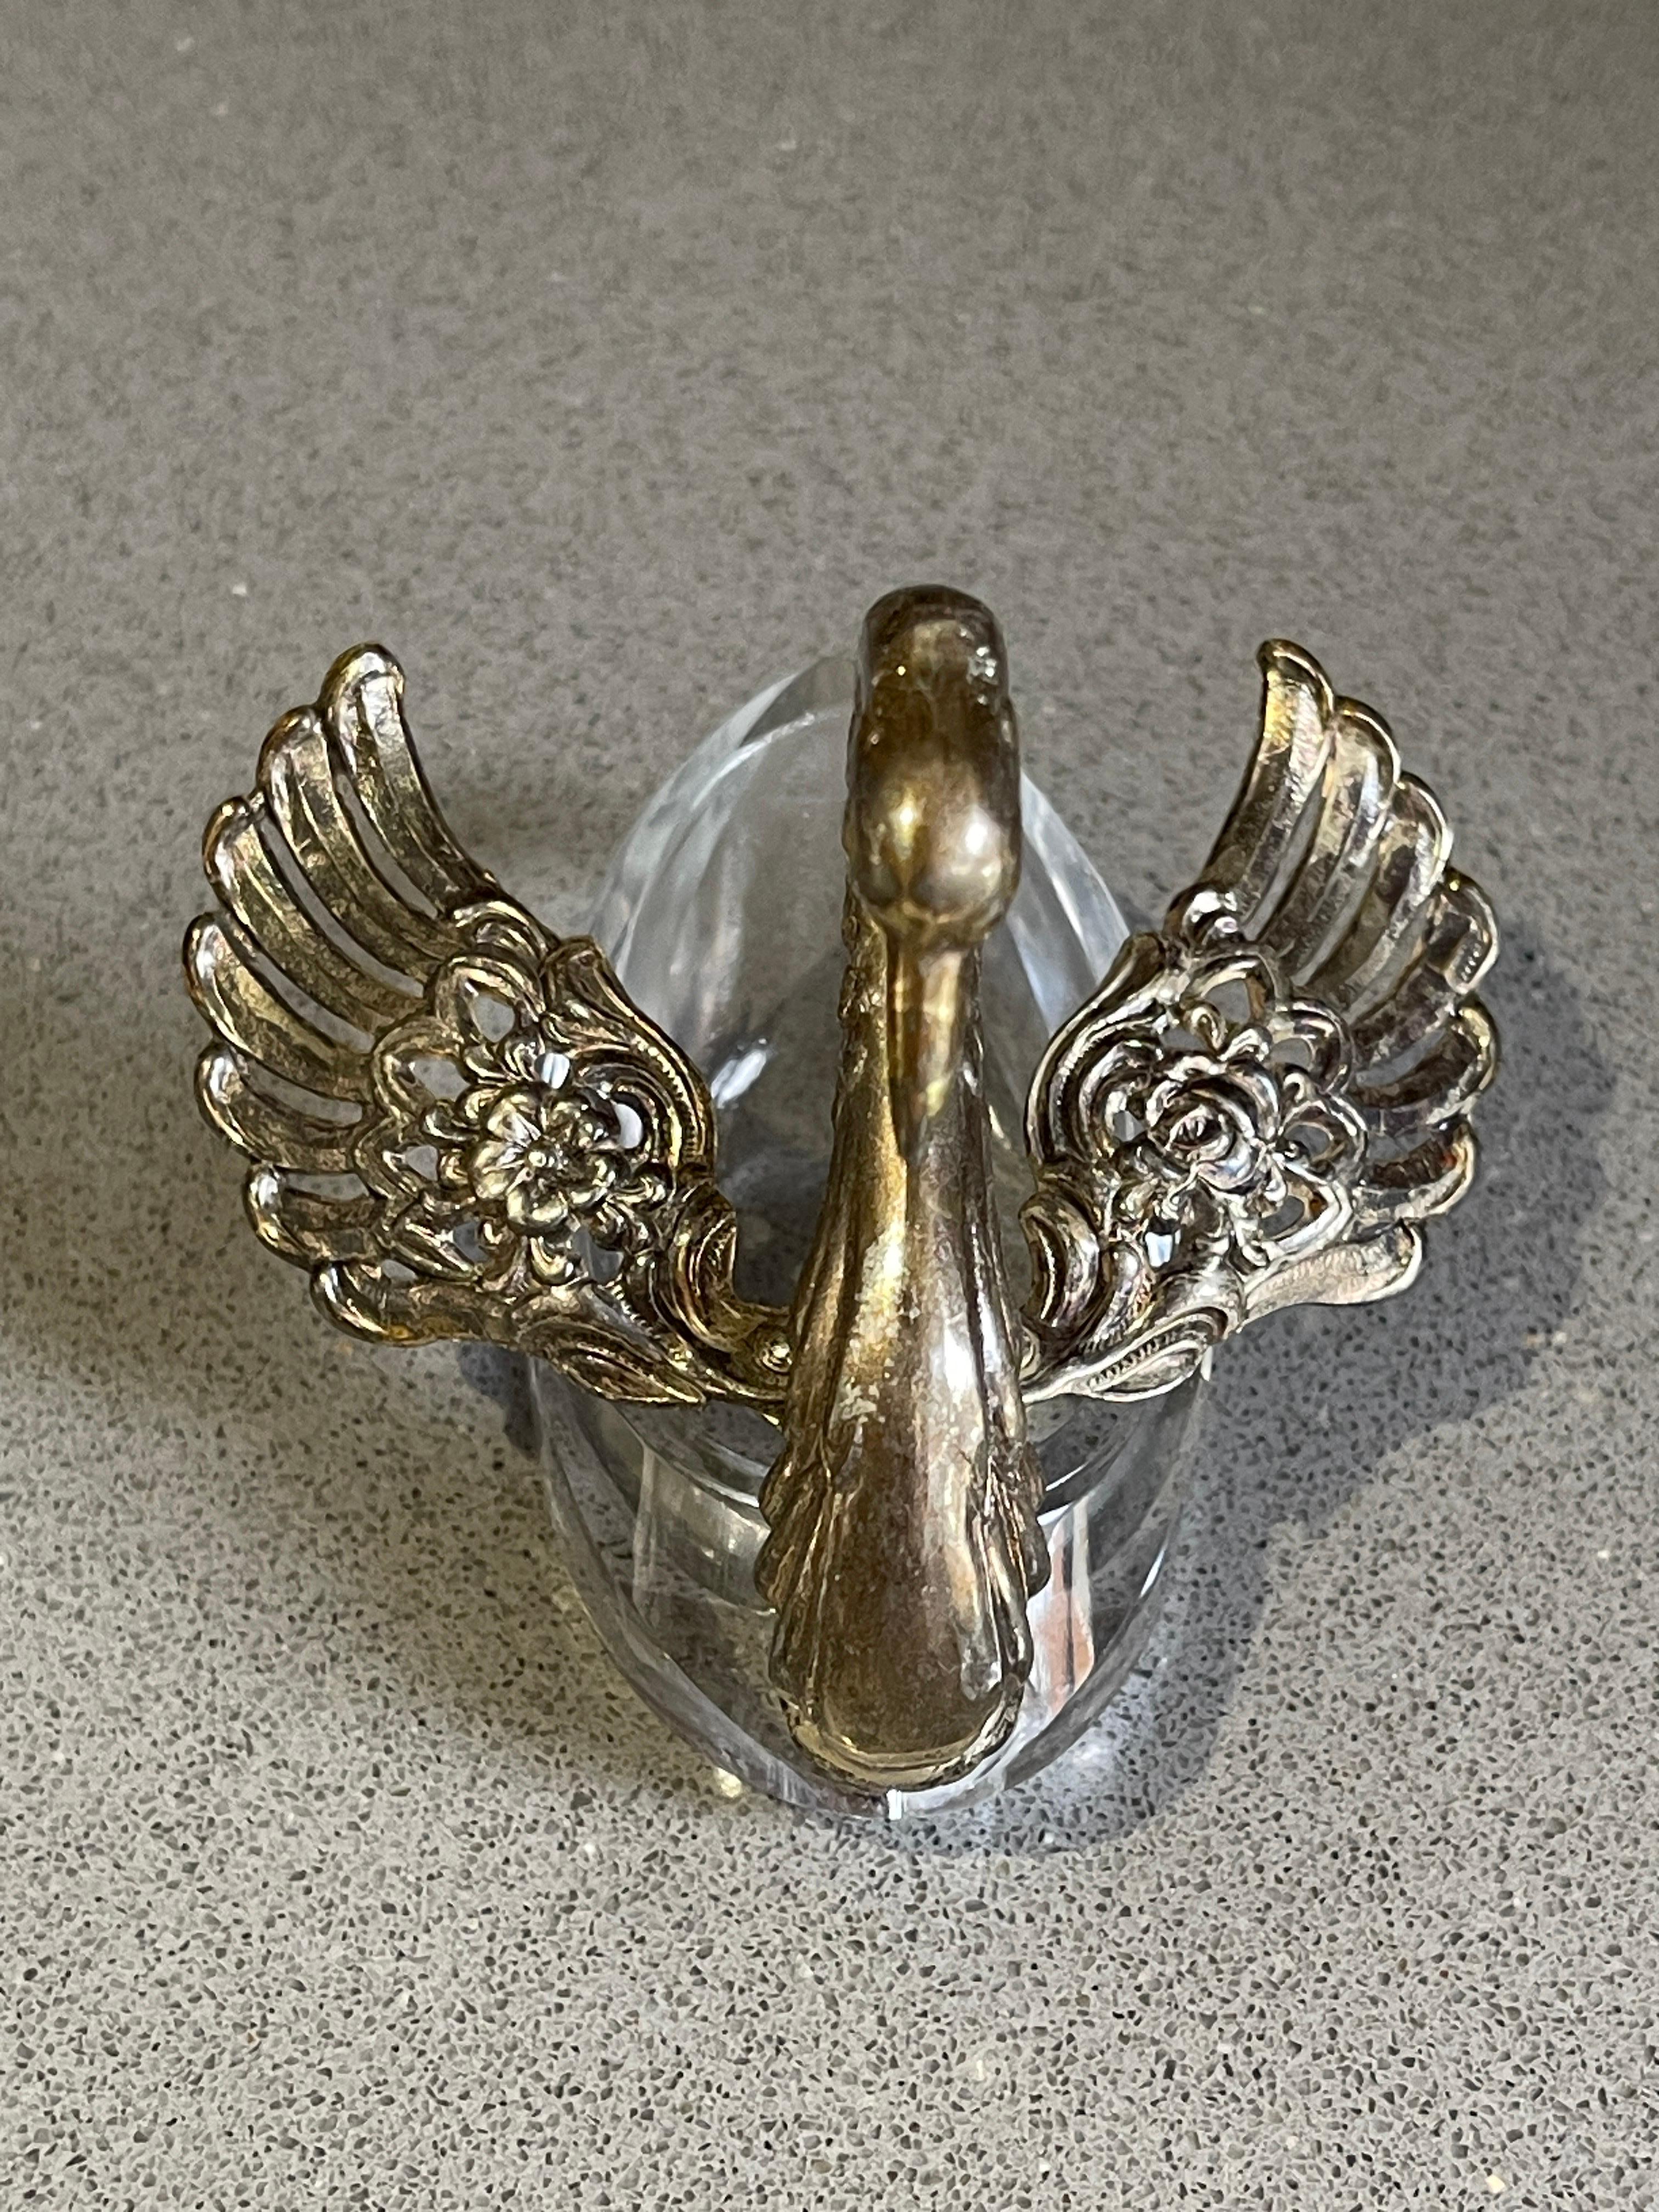 Silvered Silver Salt Shaker, A Pair of Antique Salt Shaker Crystal Swann Moving Wings For Sale